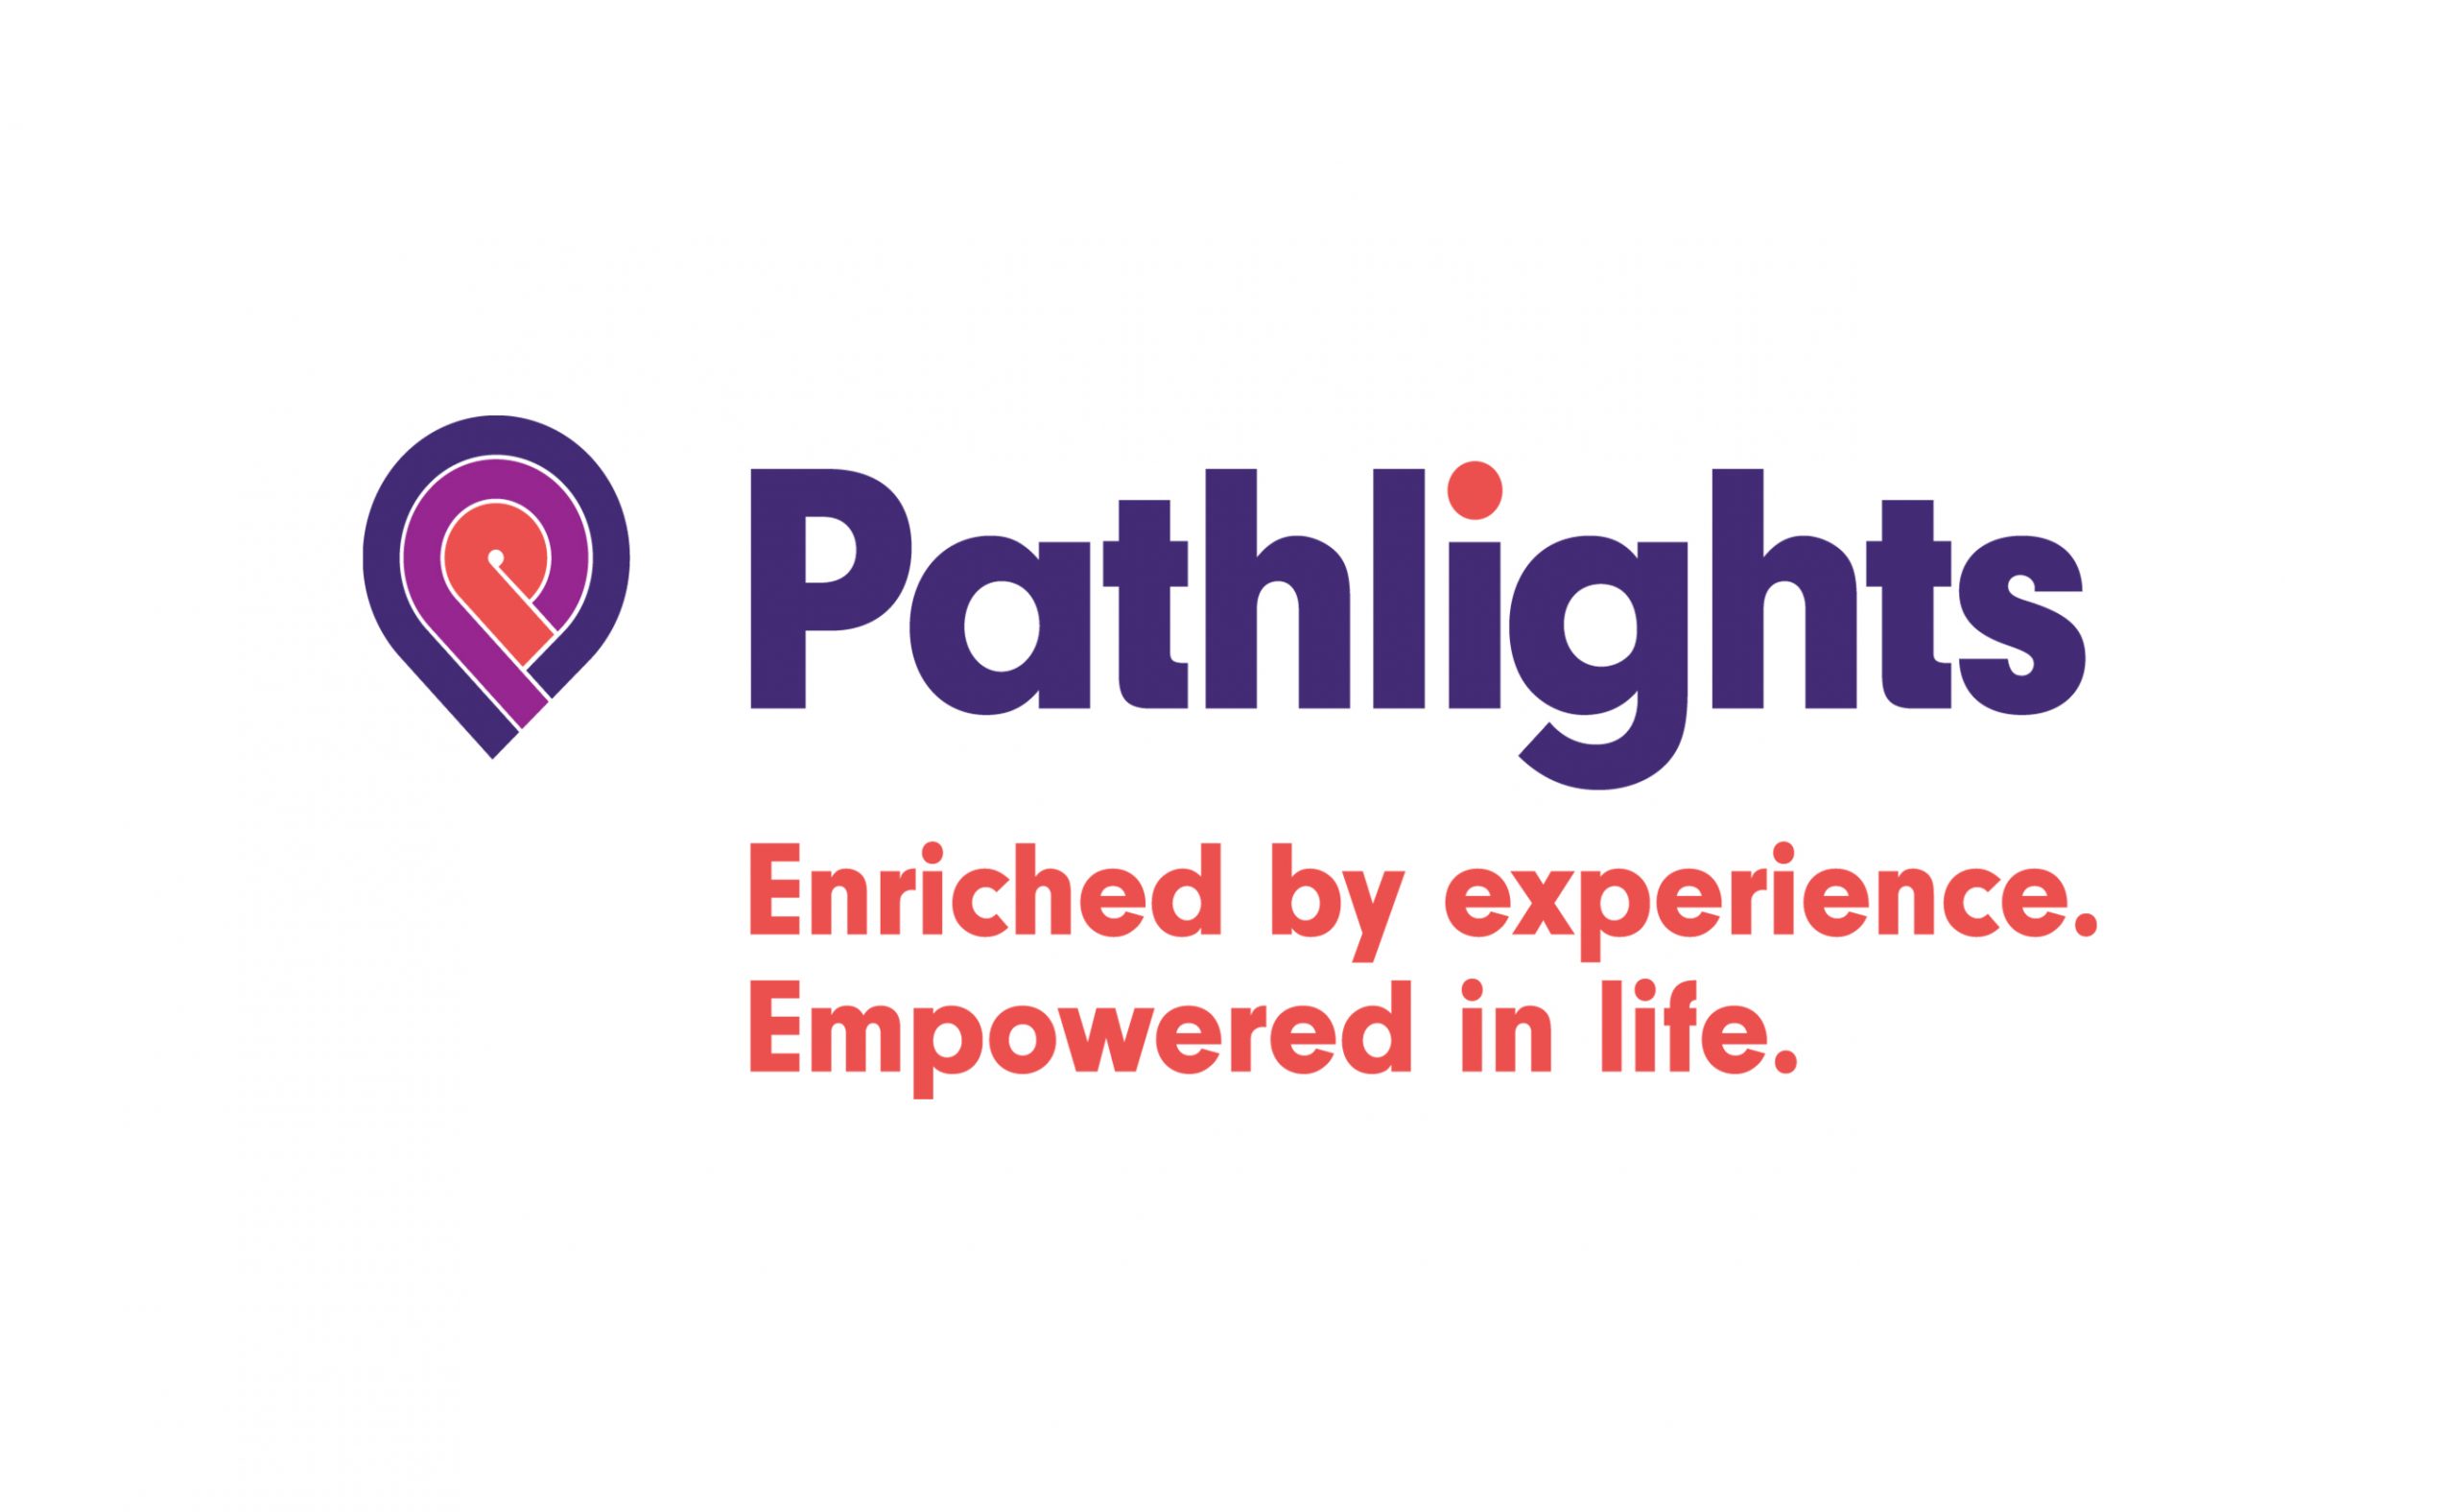 Pathlights Council on Aging